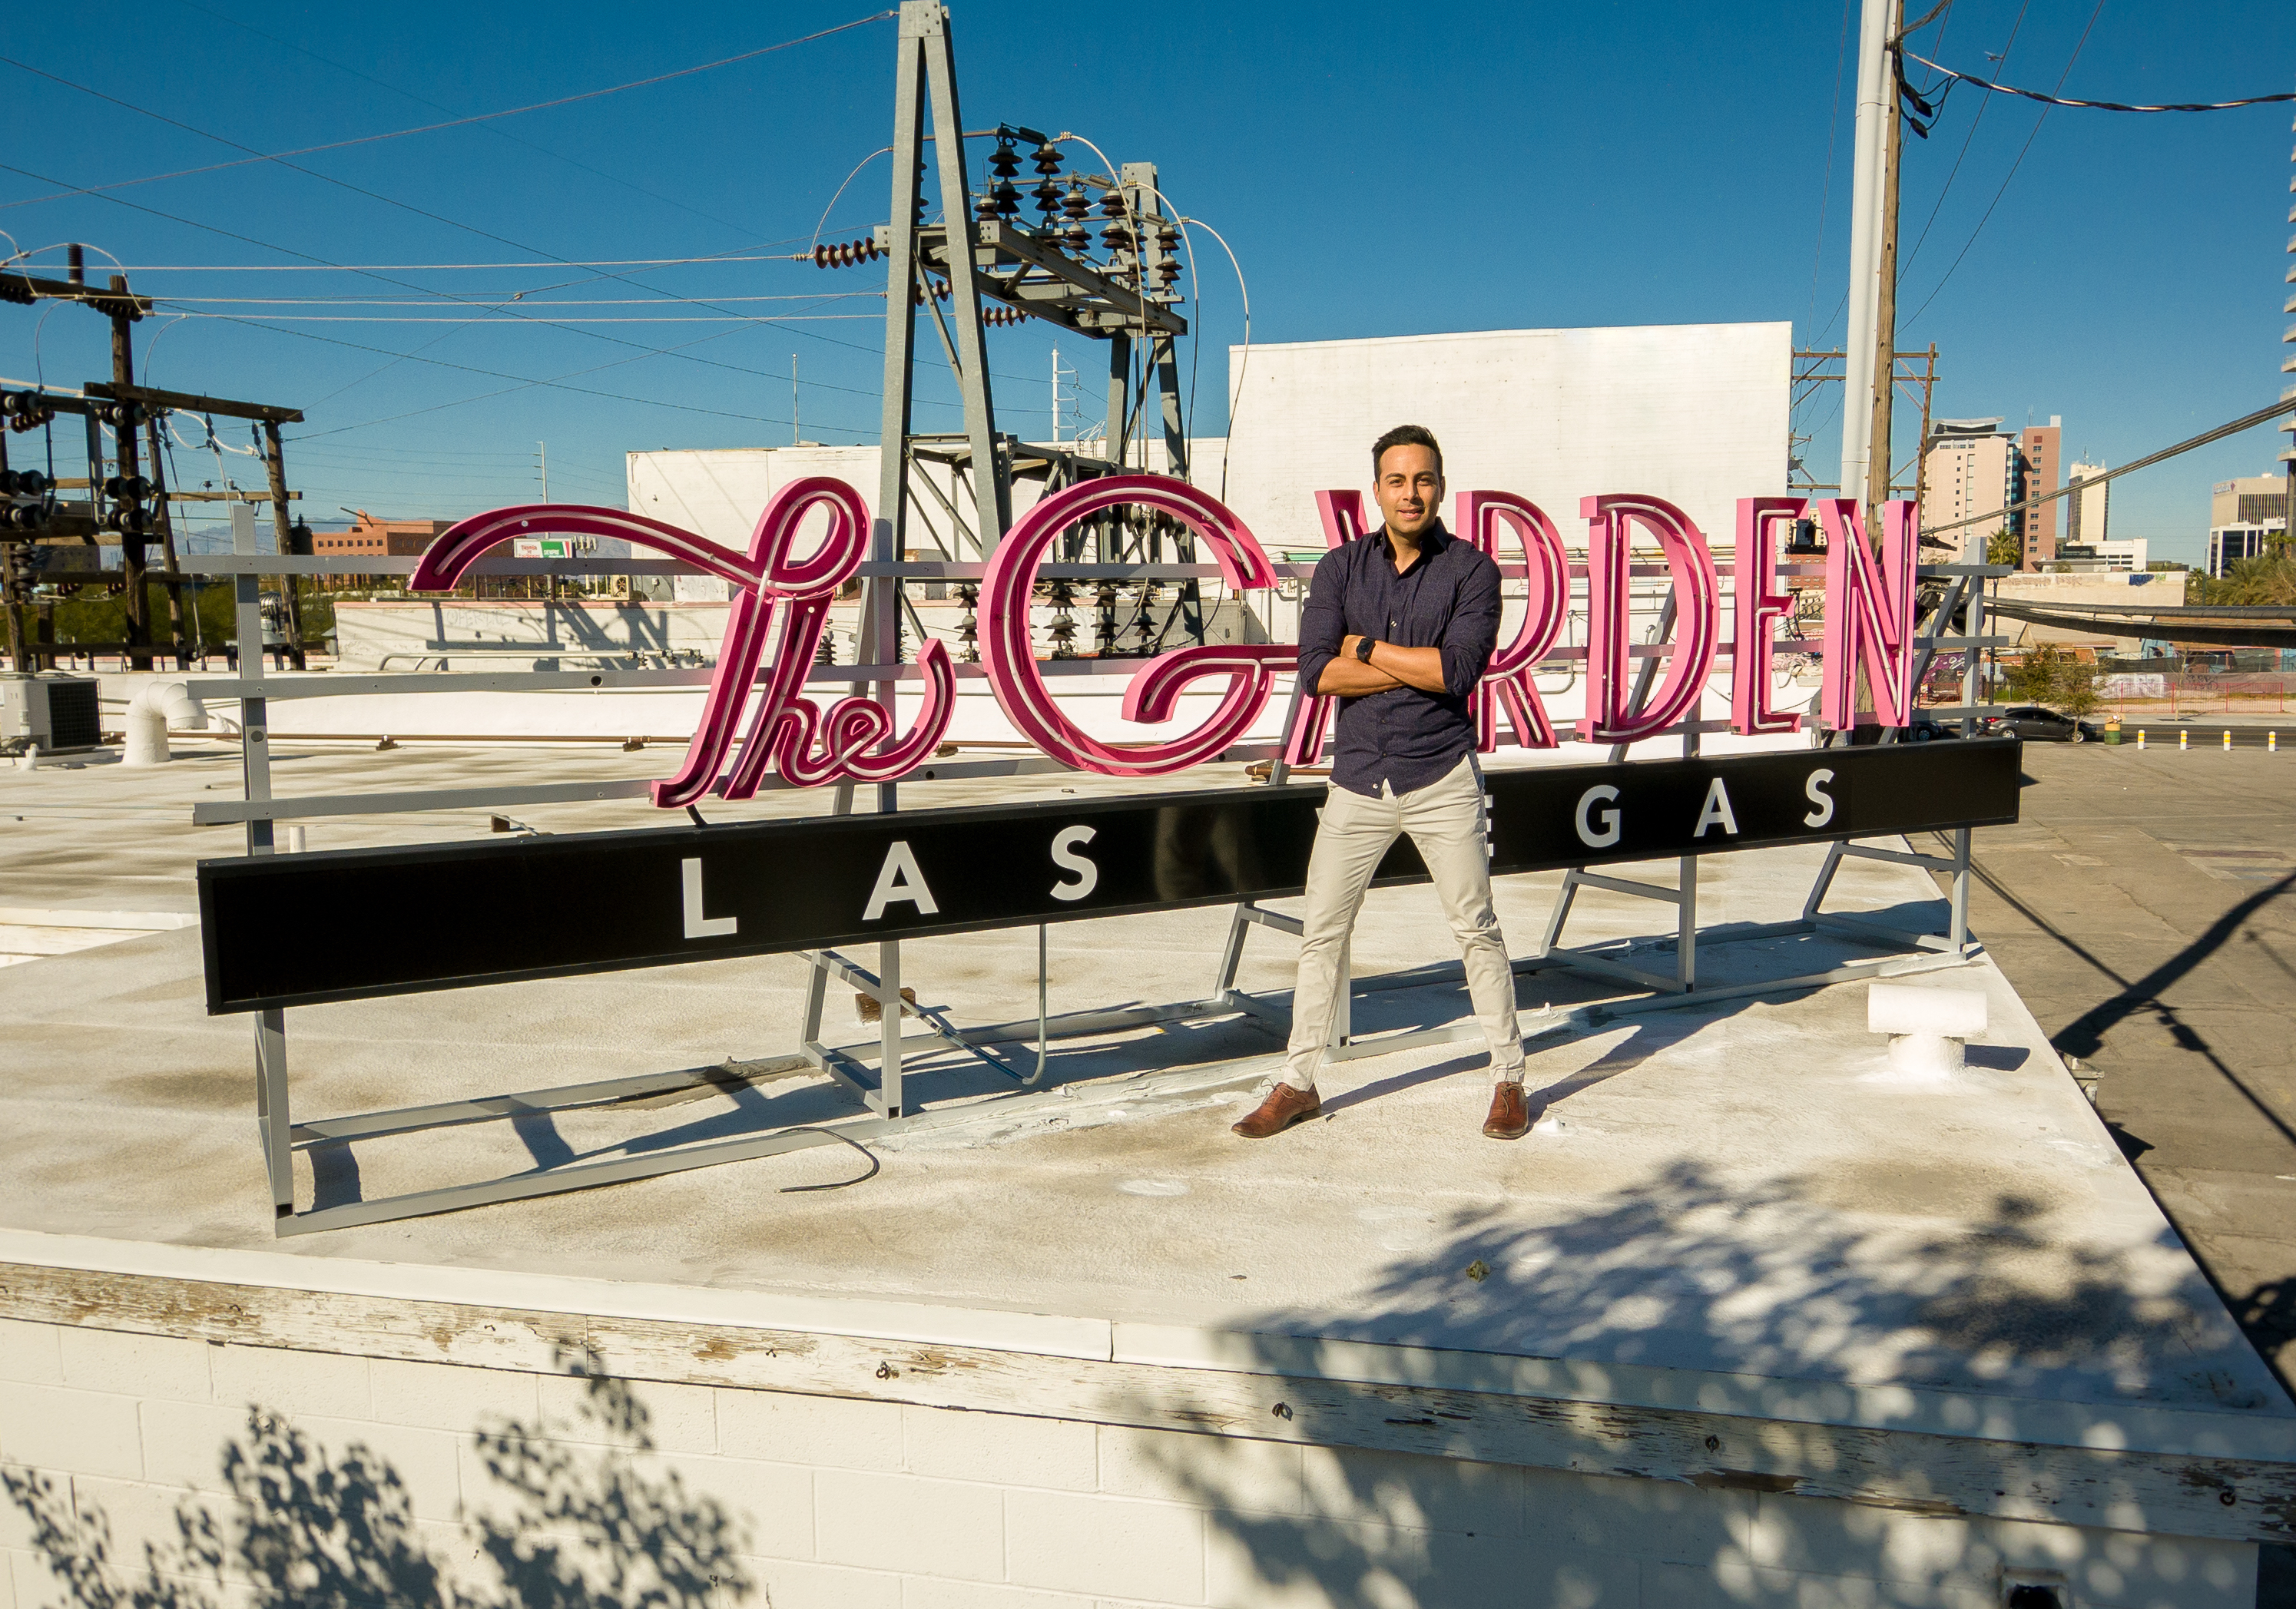 A man stands in front of a rooftop sign